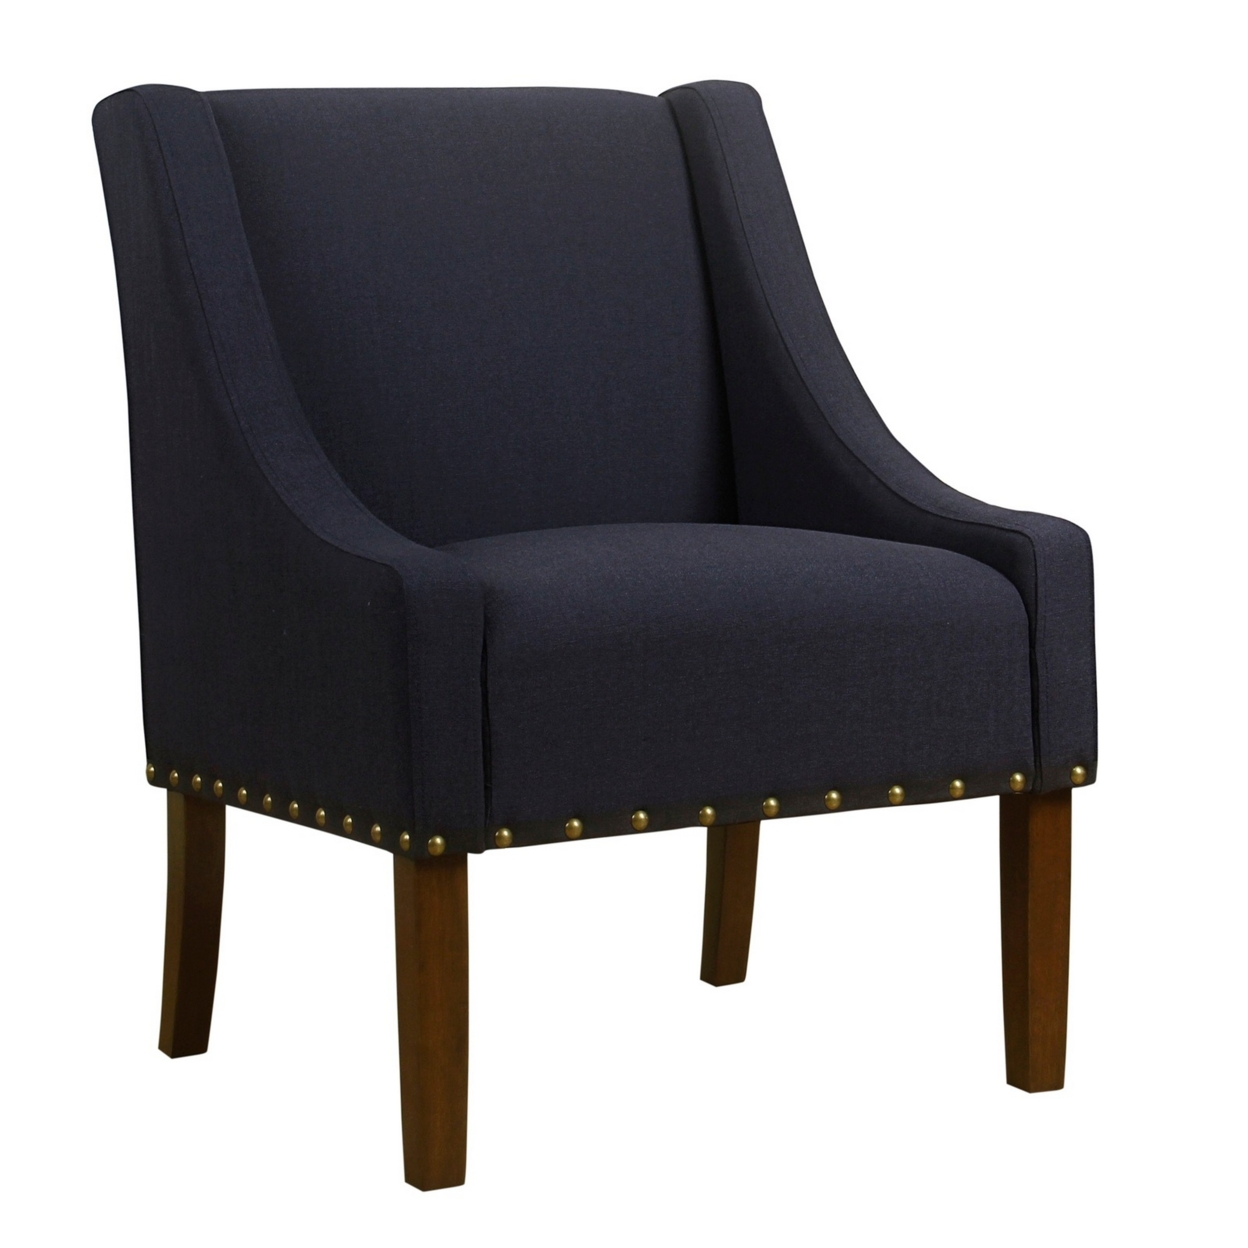 Fabric Upholstered Accent Chair With Swooping Arms And Nail Head Trim, Blue And Brown- Saltoro Sherpi